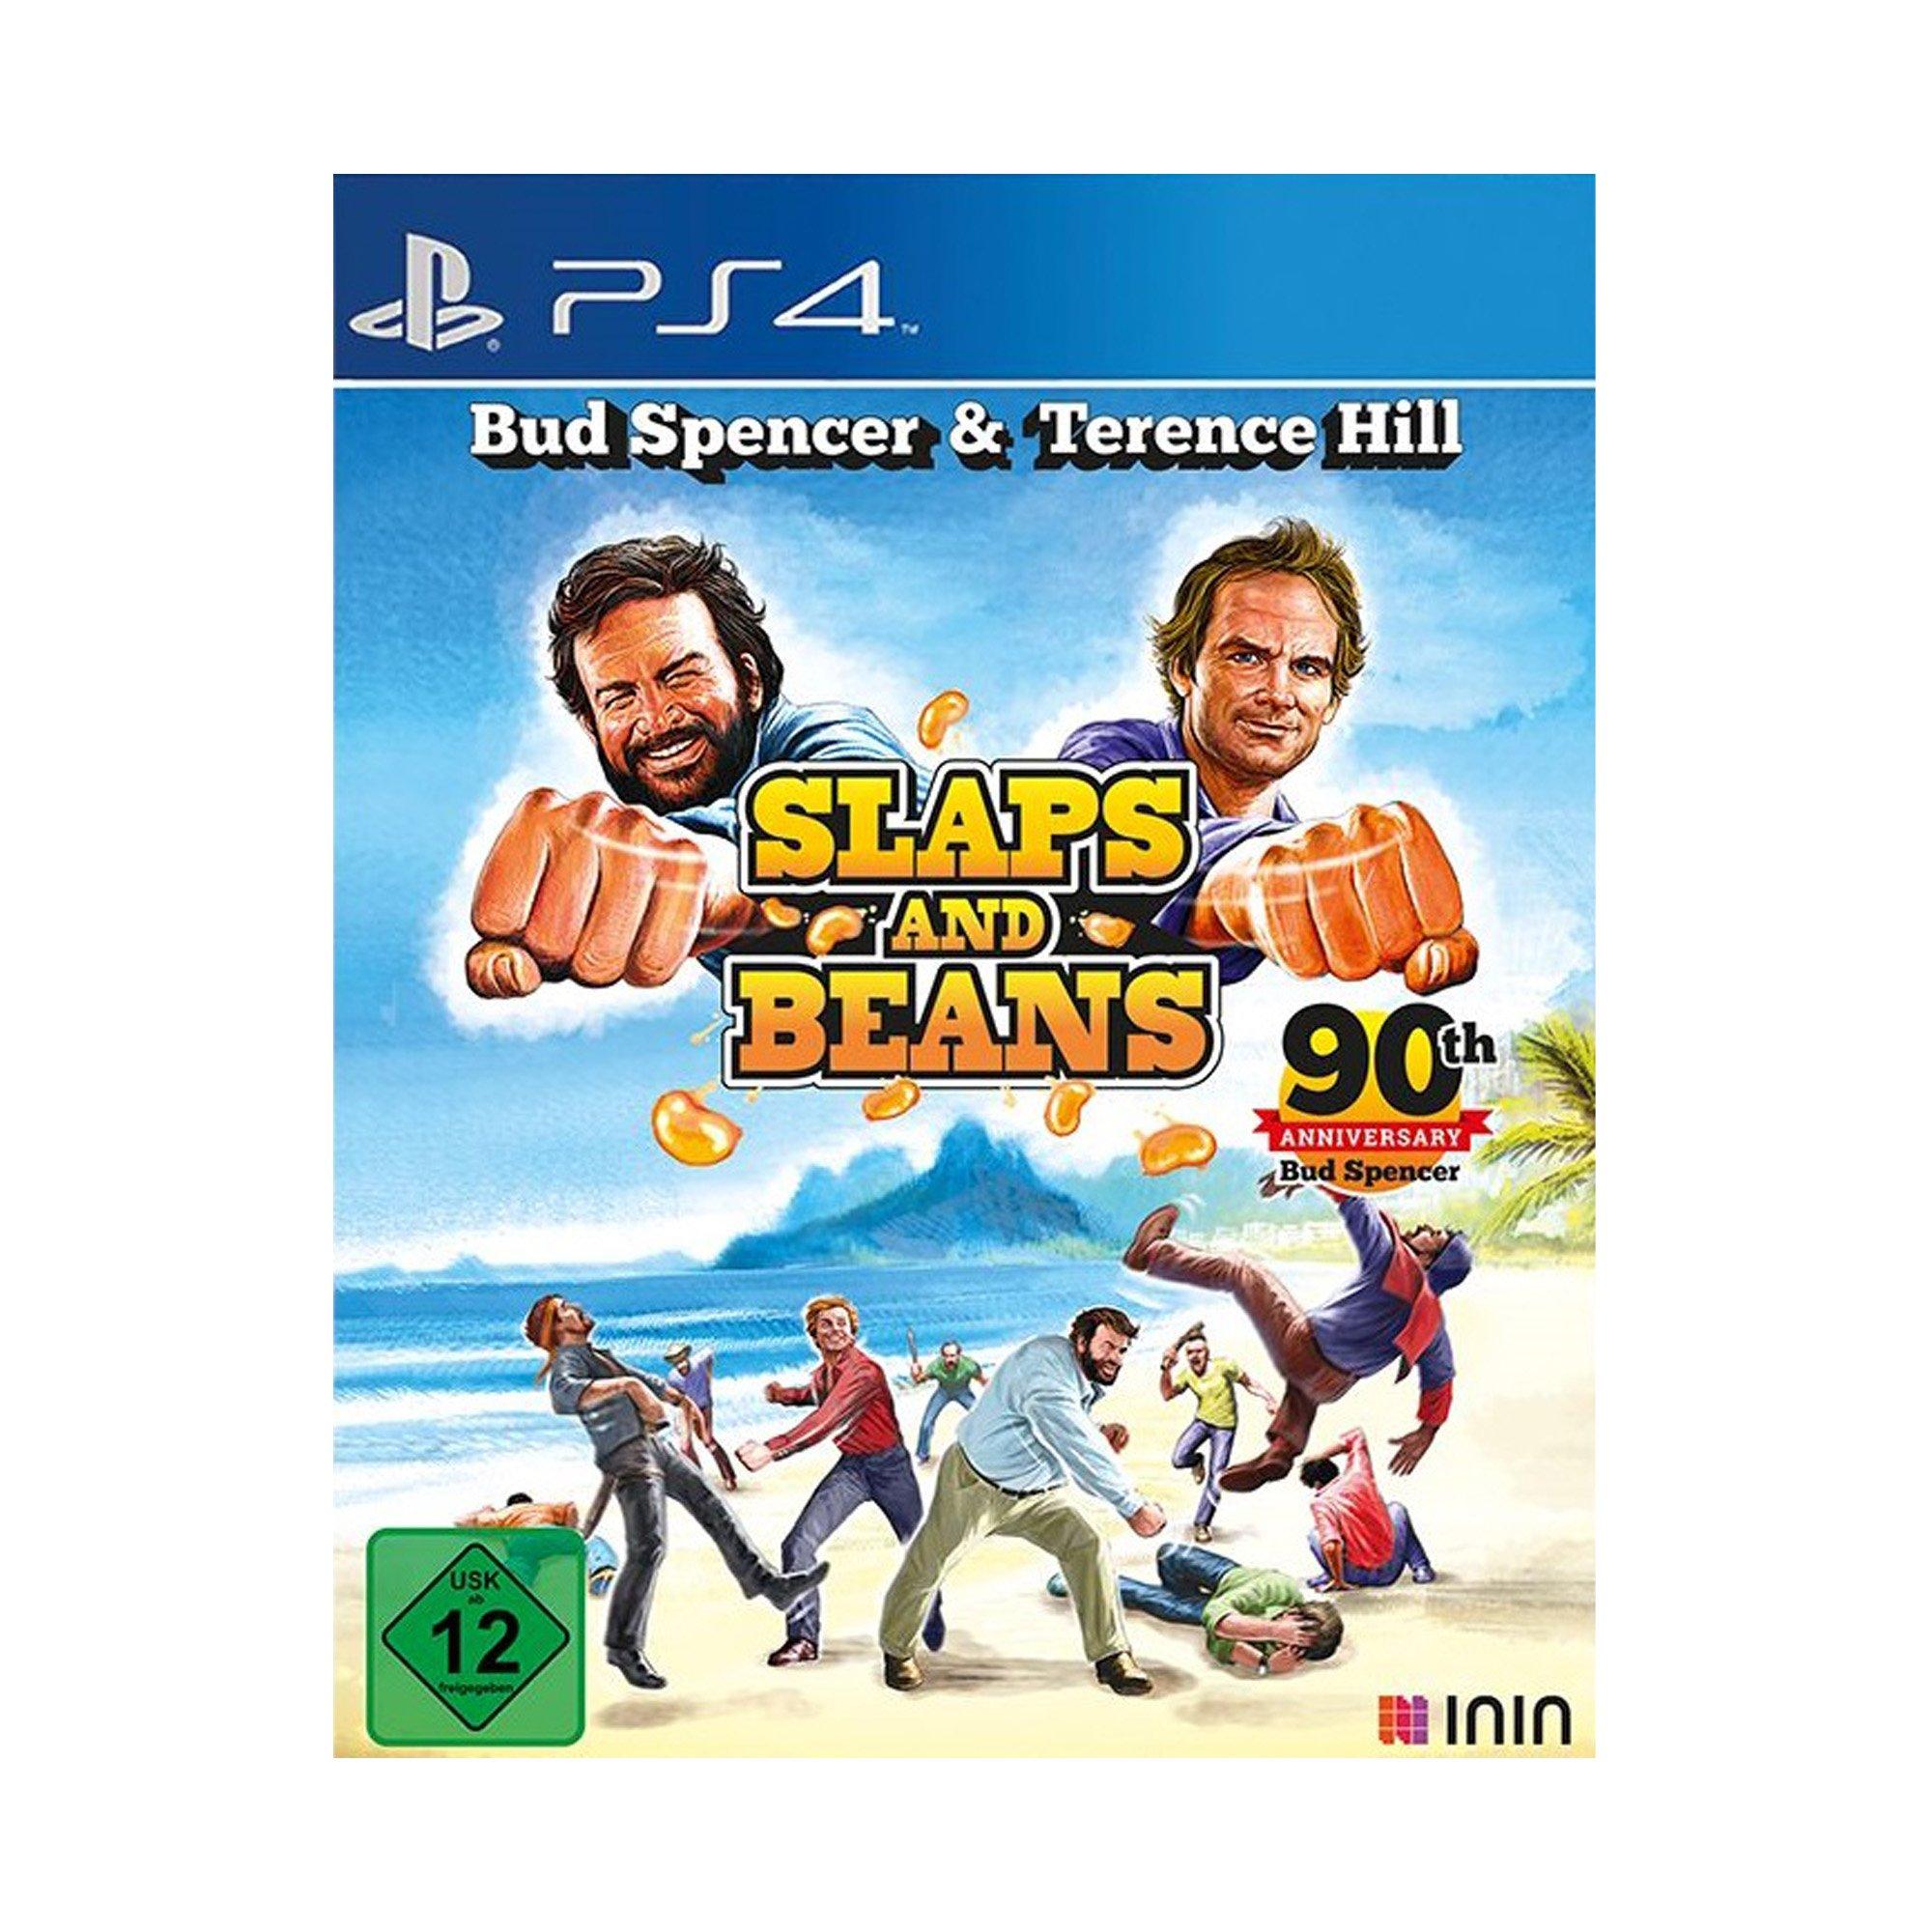 ININ Games Bud Spencer & Terence Hill Slaps And Beans Anniversary Edition (PS4) DE 